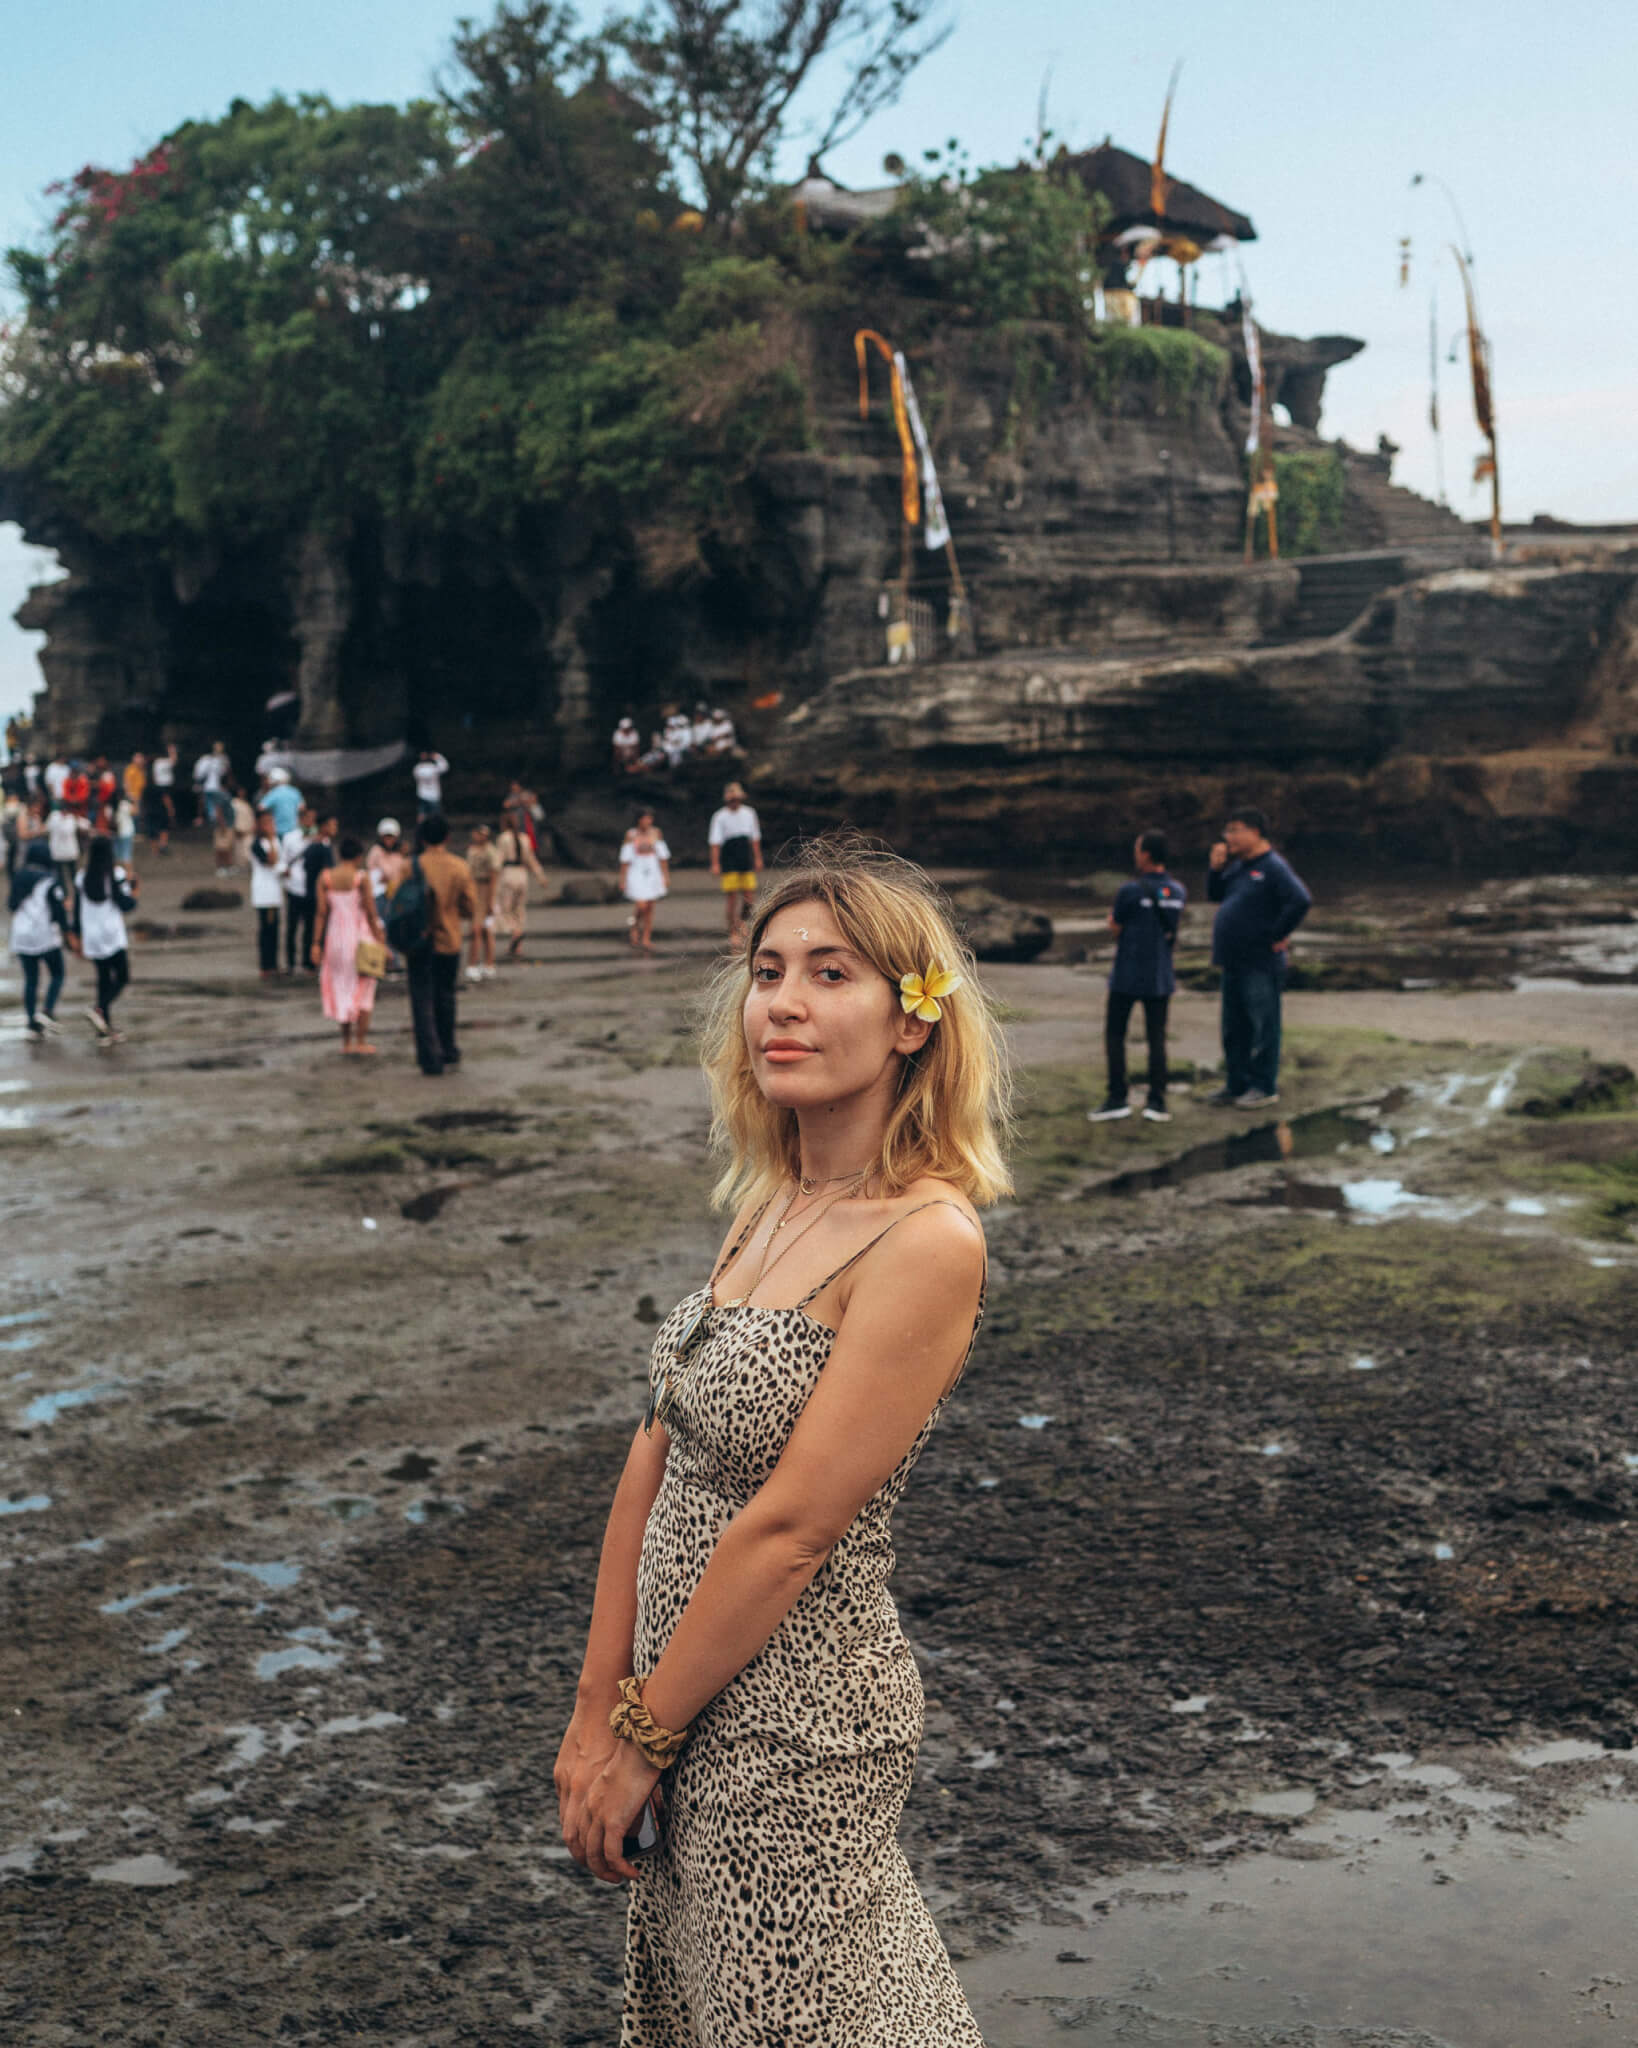 Tanah-Lot-Tour-18-of-18-scaled Explore Bali Temples with Me